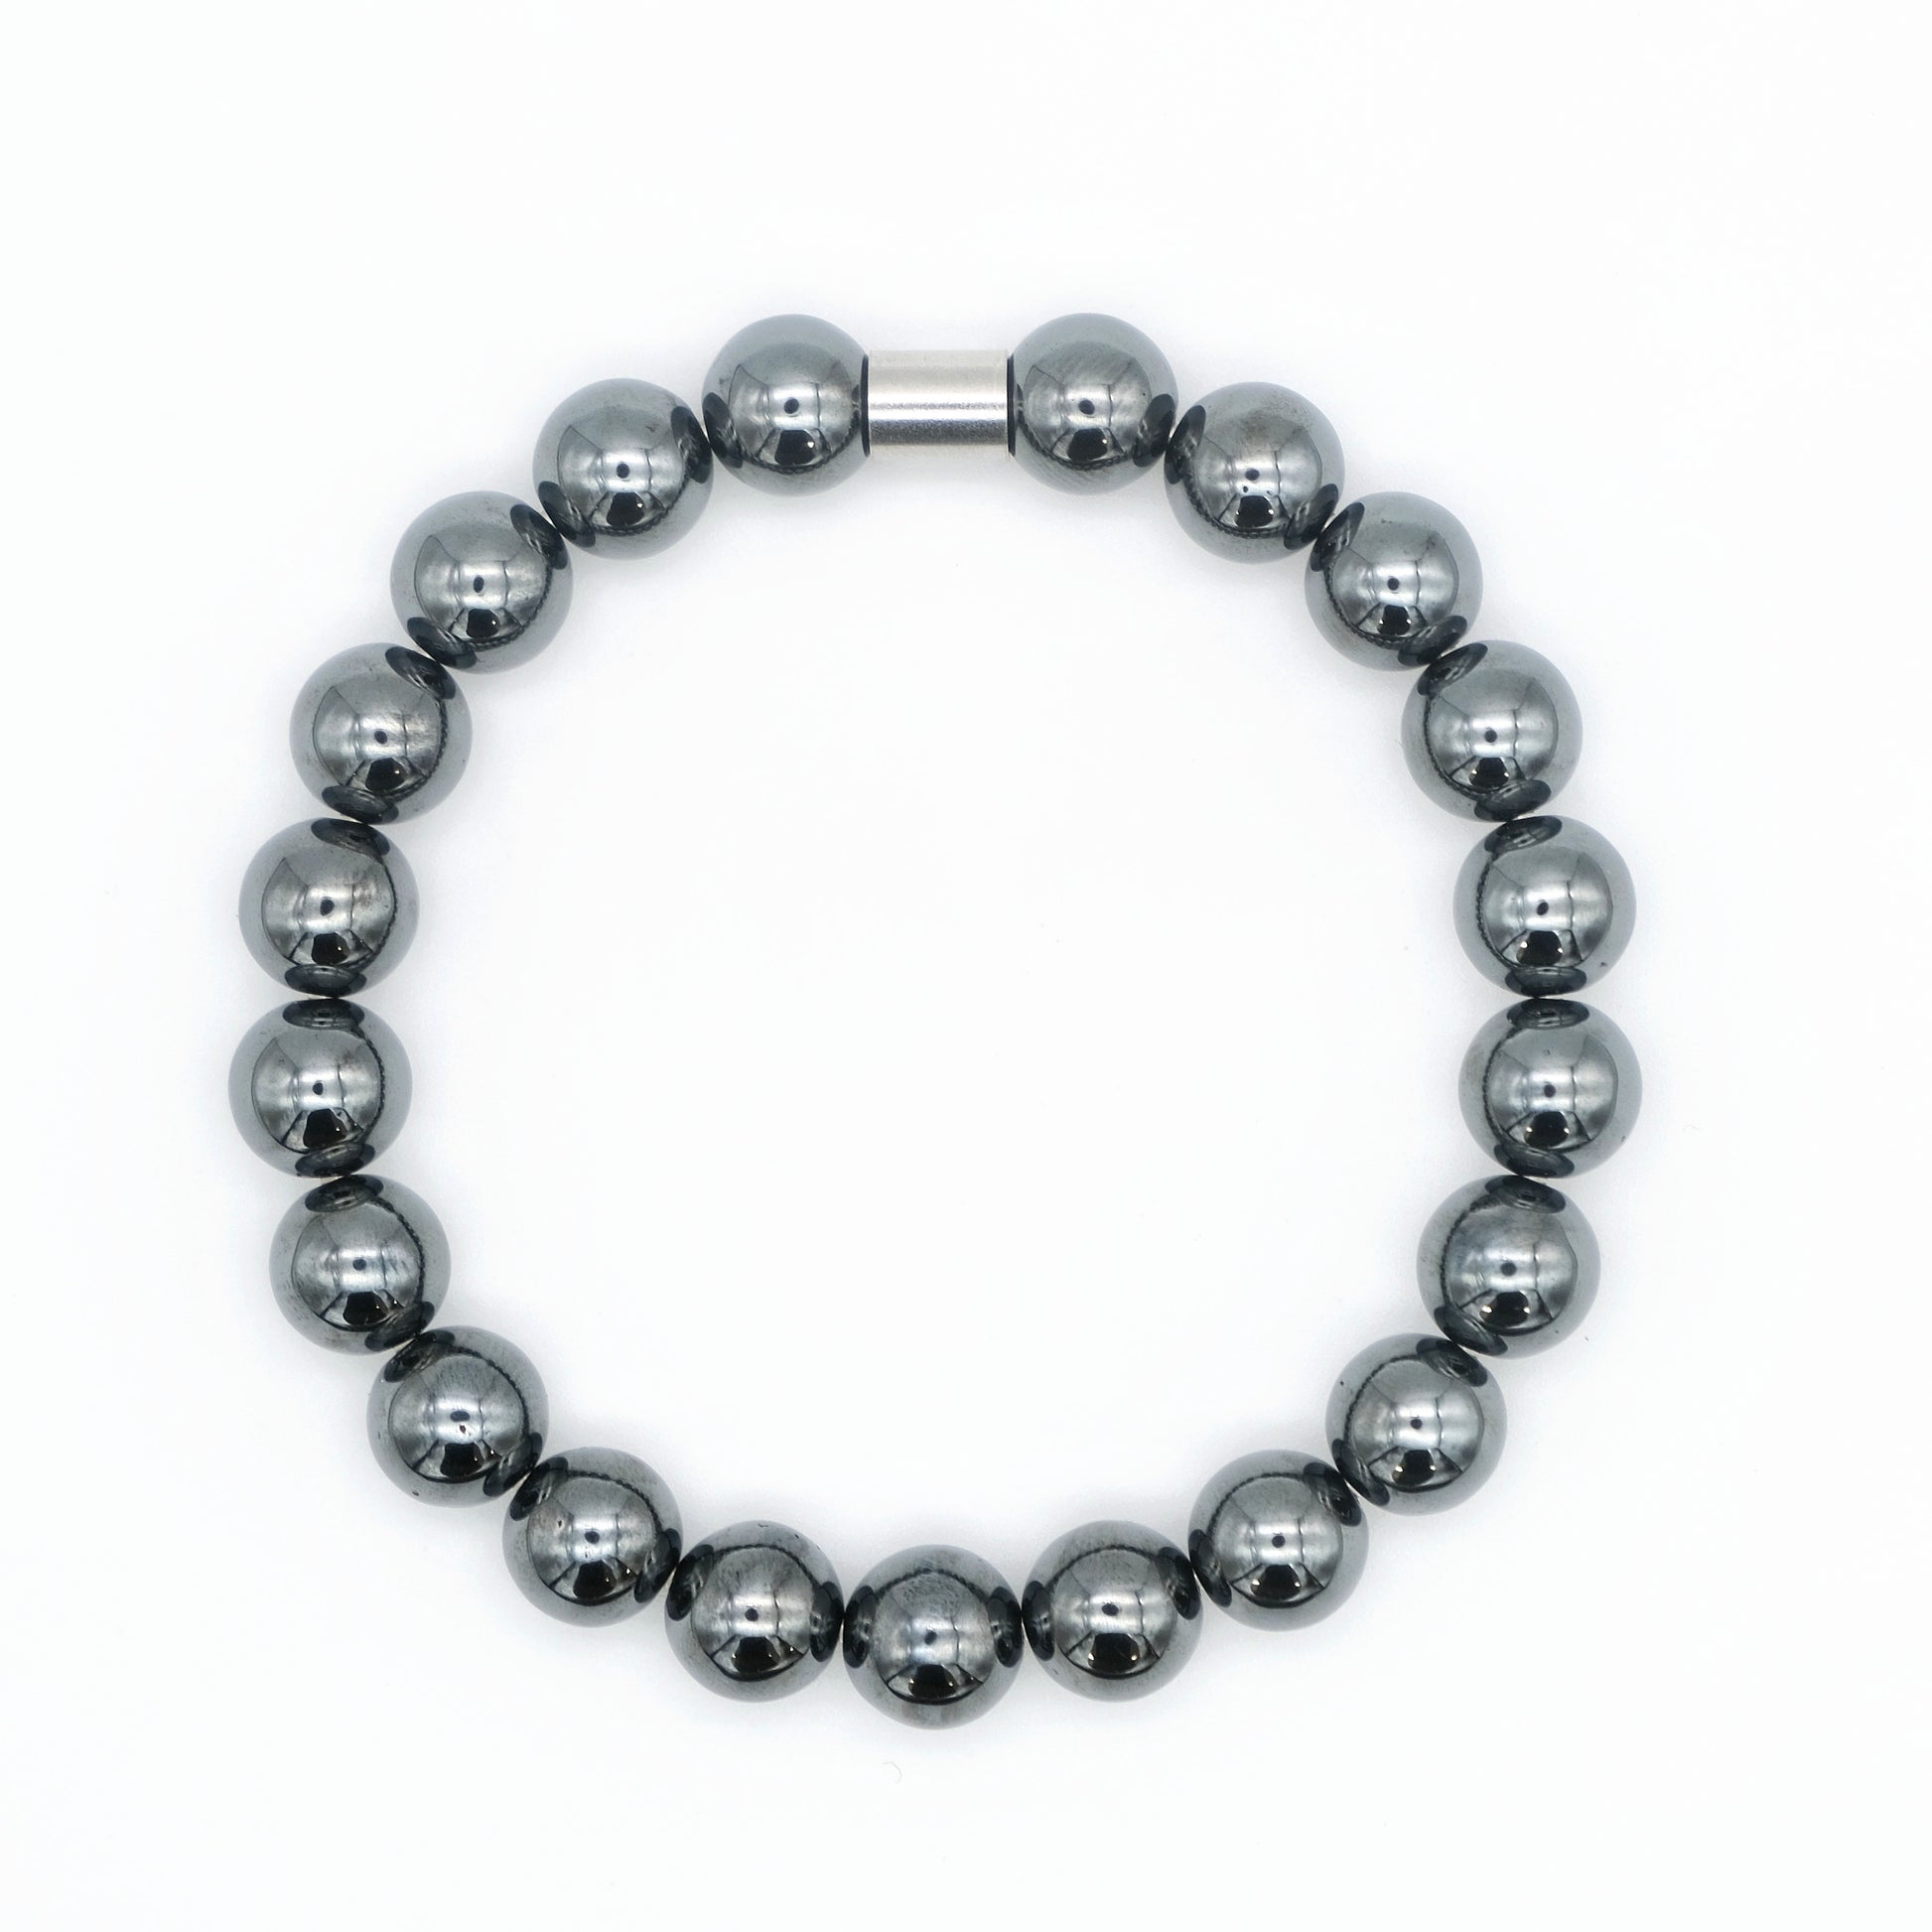 hematite gemstone bracelet in 10mm beads with steel accessory from above